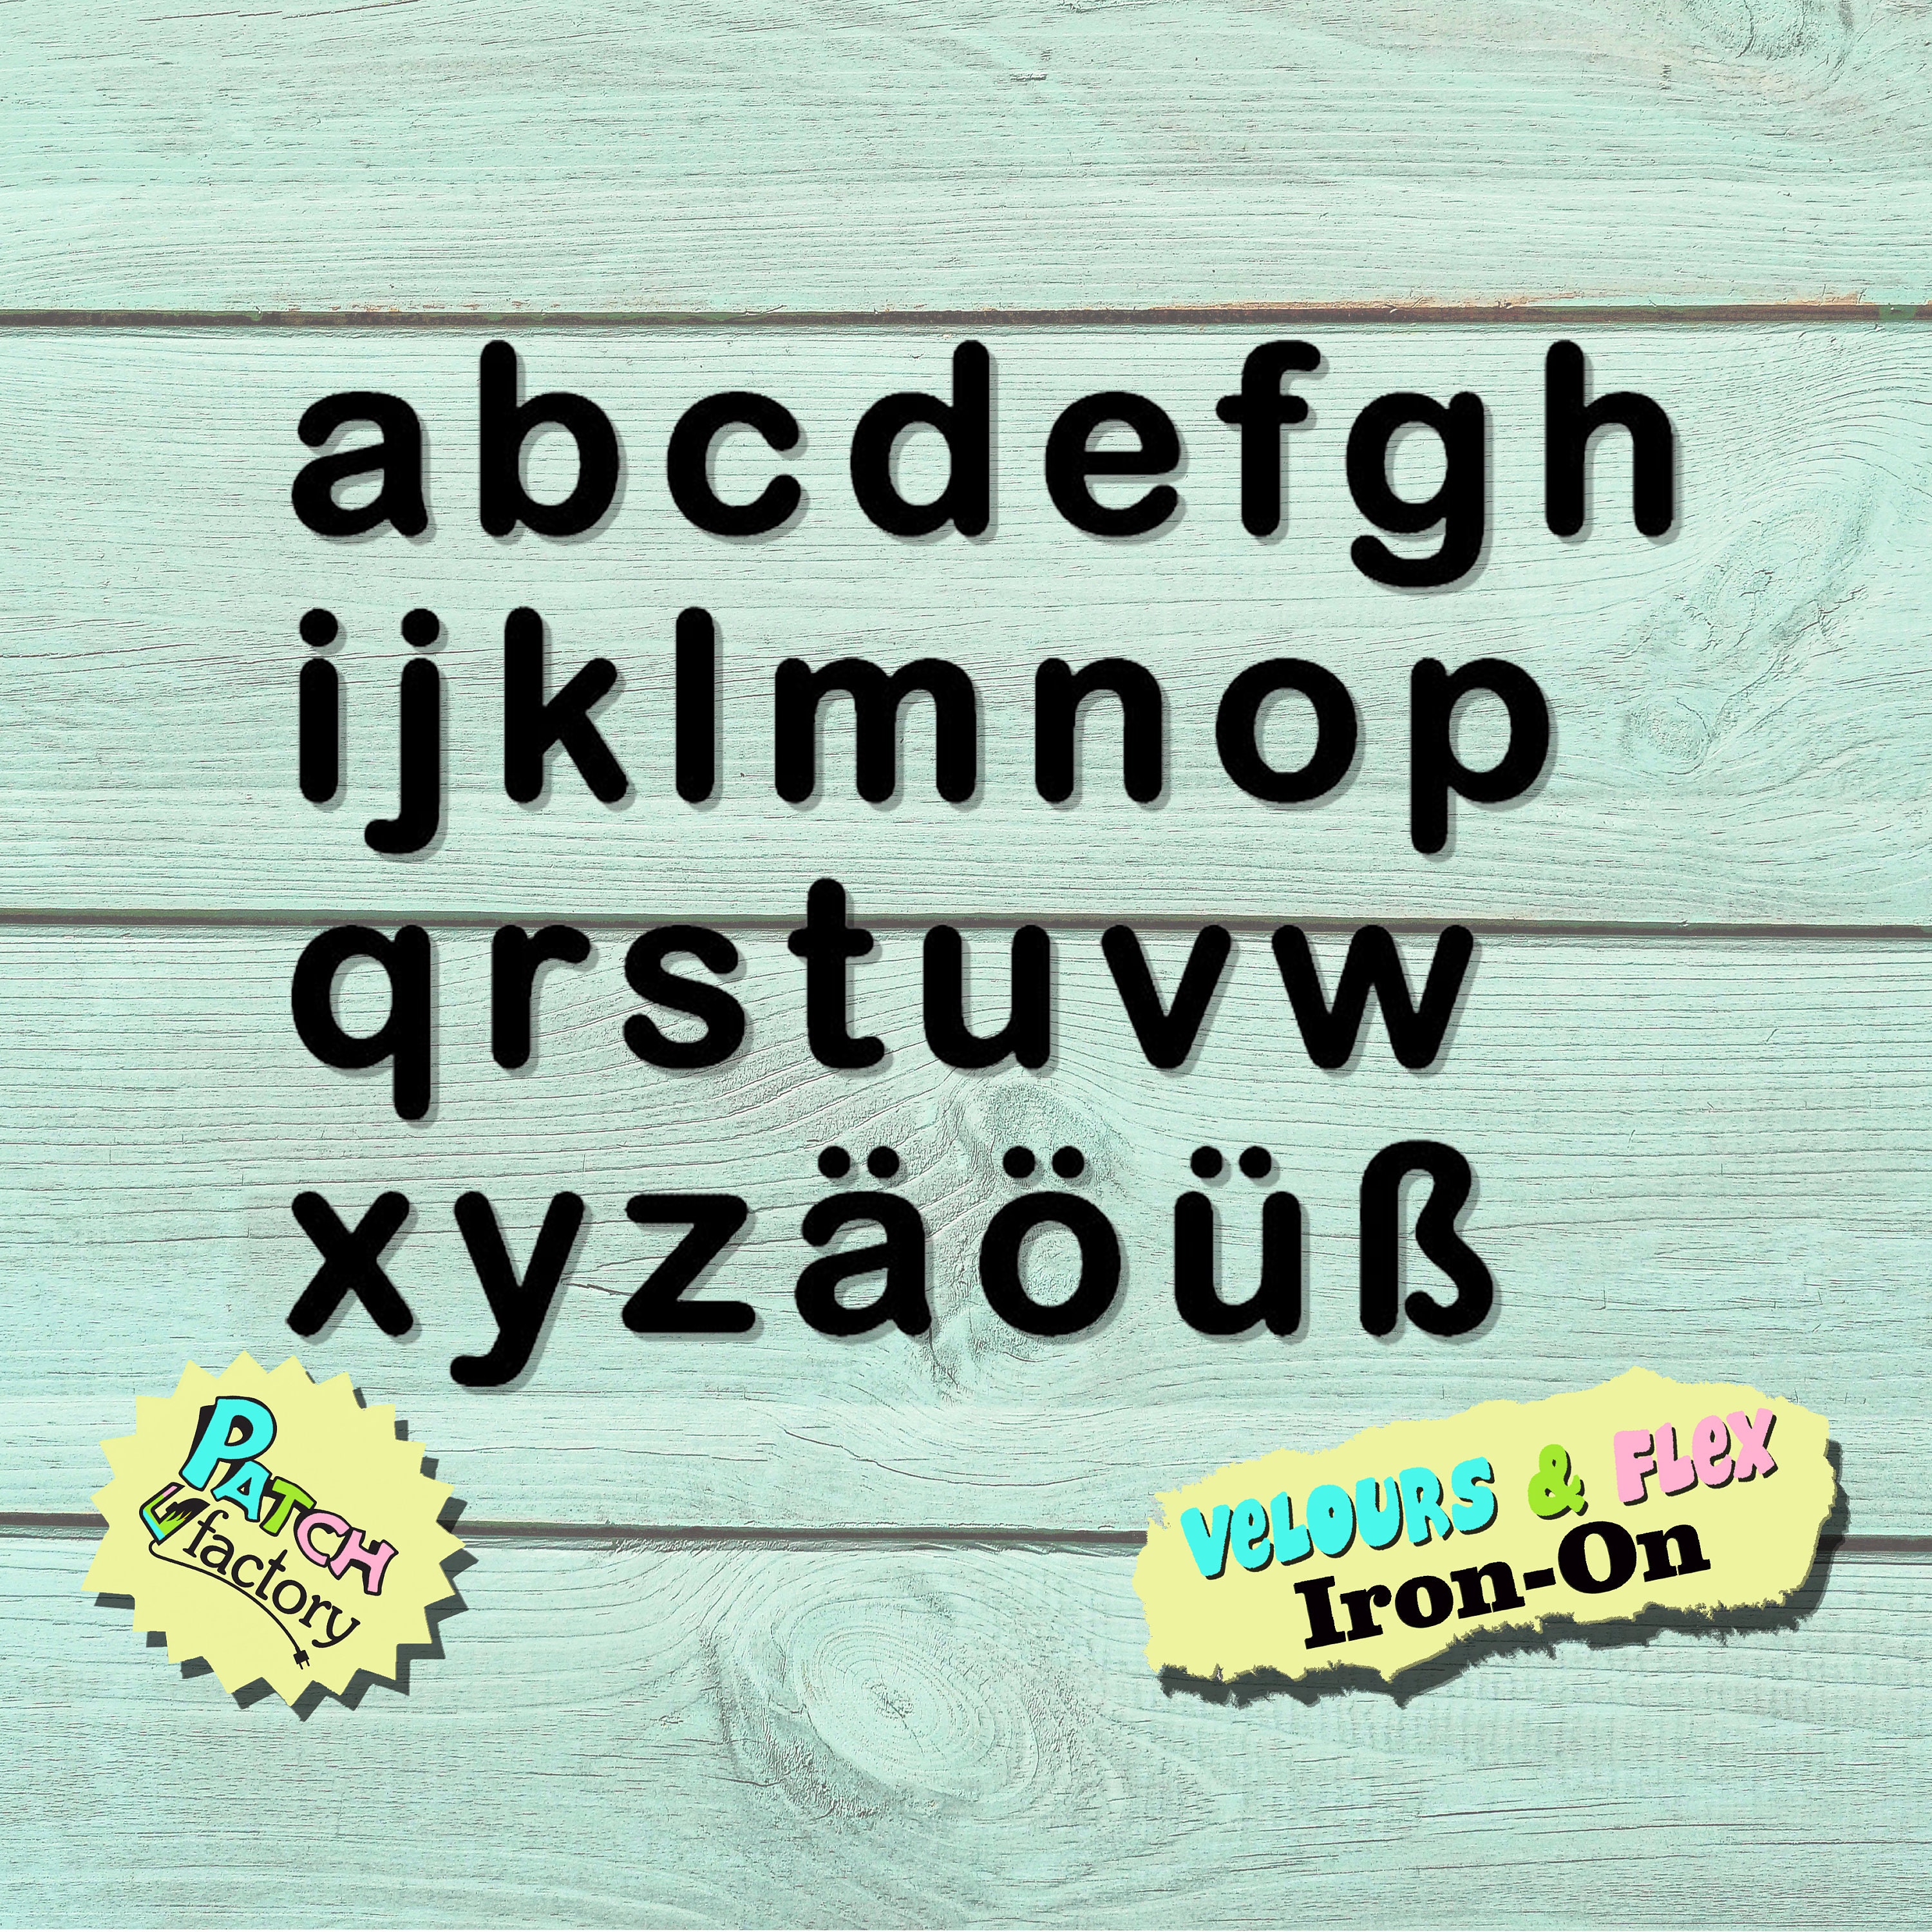 Iron on Letters Block Letters Upper-case & Lower-case Letters 3 4